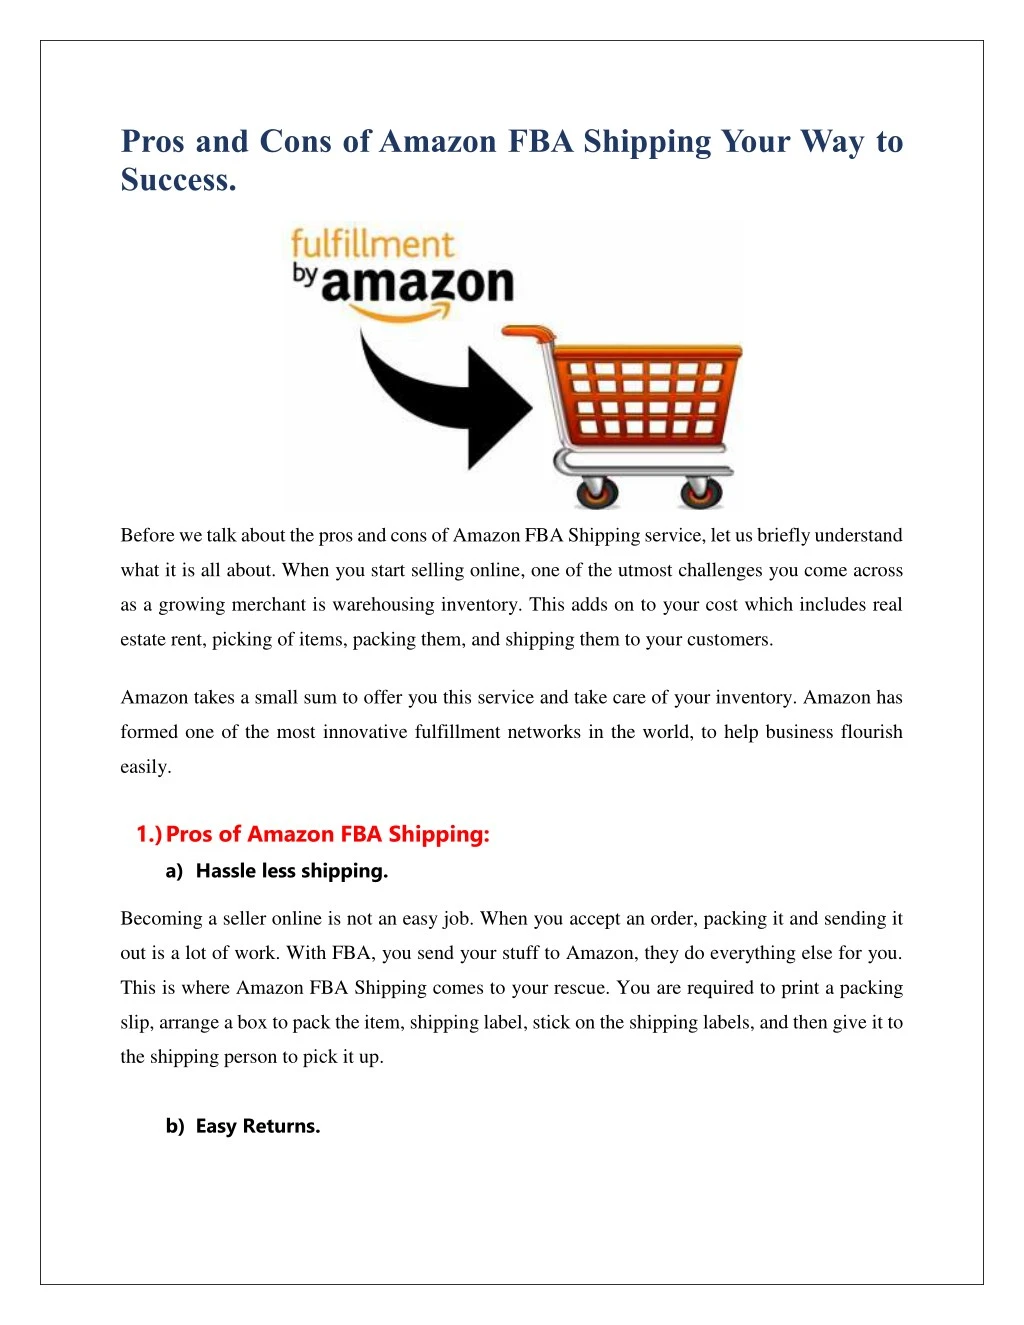 pros and cons of amazon fba shipping your